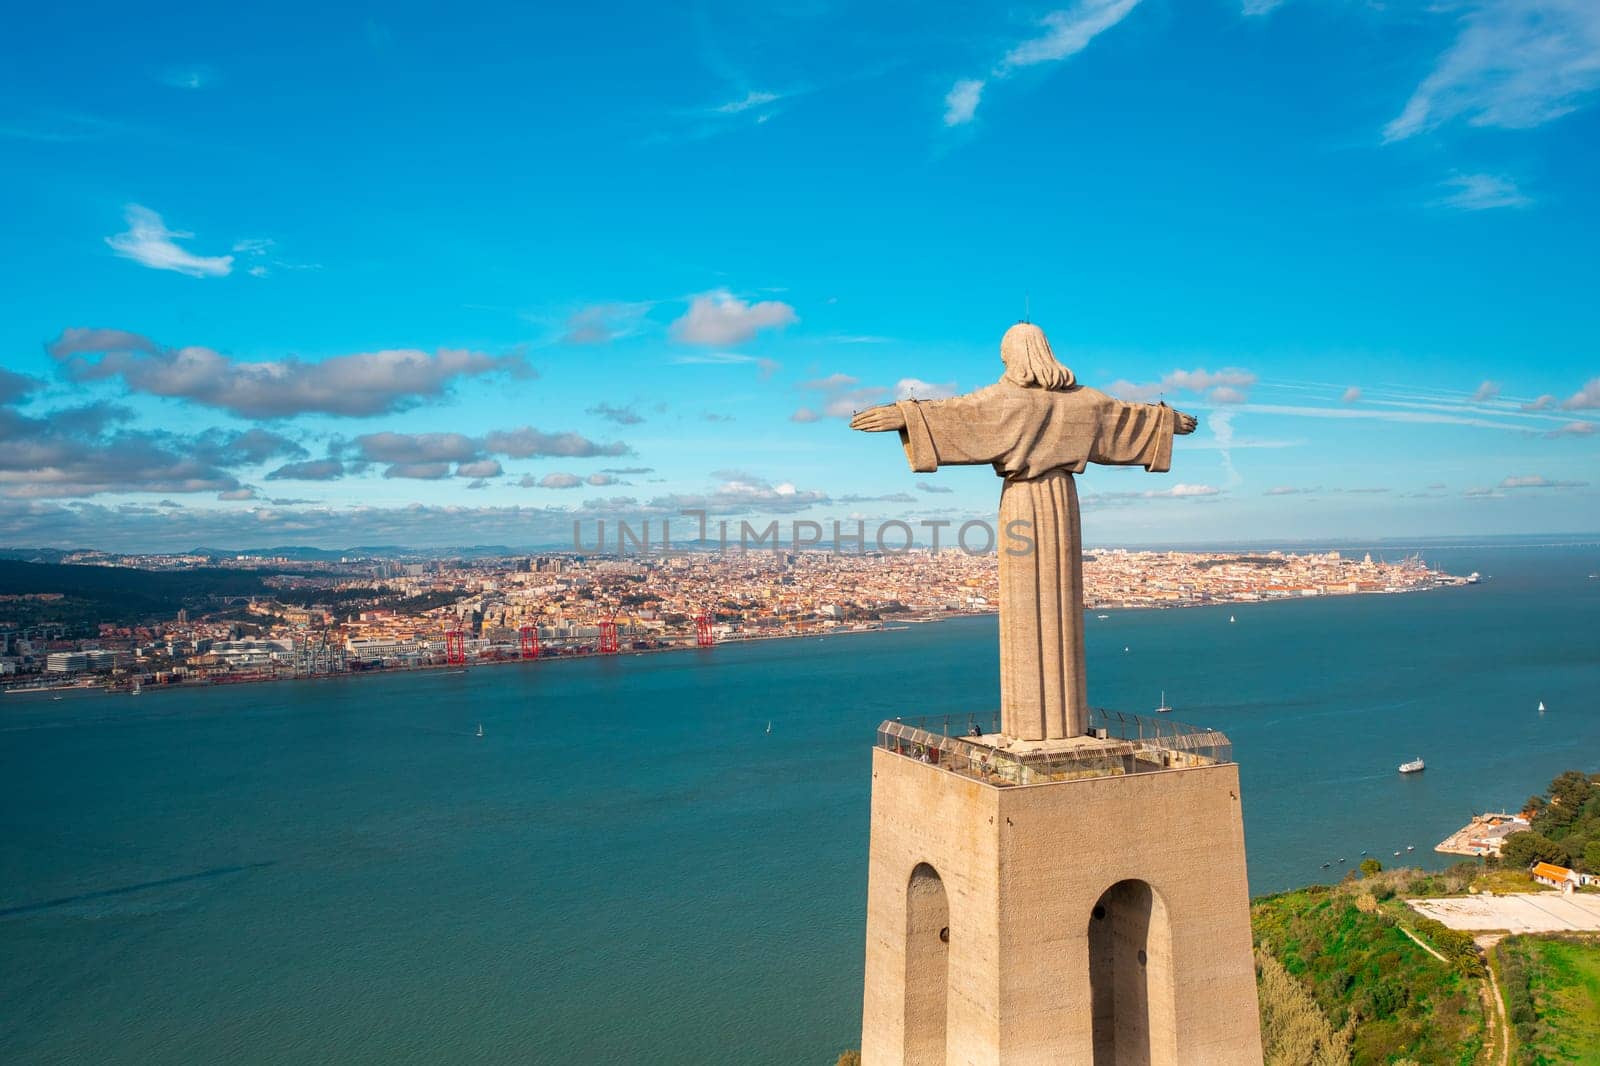 Aerial View of Christ the King Statue overlooking Tagus River and cityscape under blue sky. Bird's eye view Catholic monument and city. Lisbon, Portugal